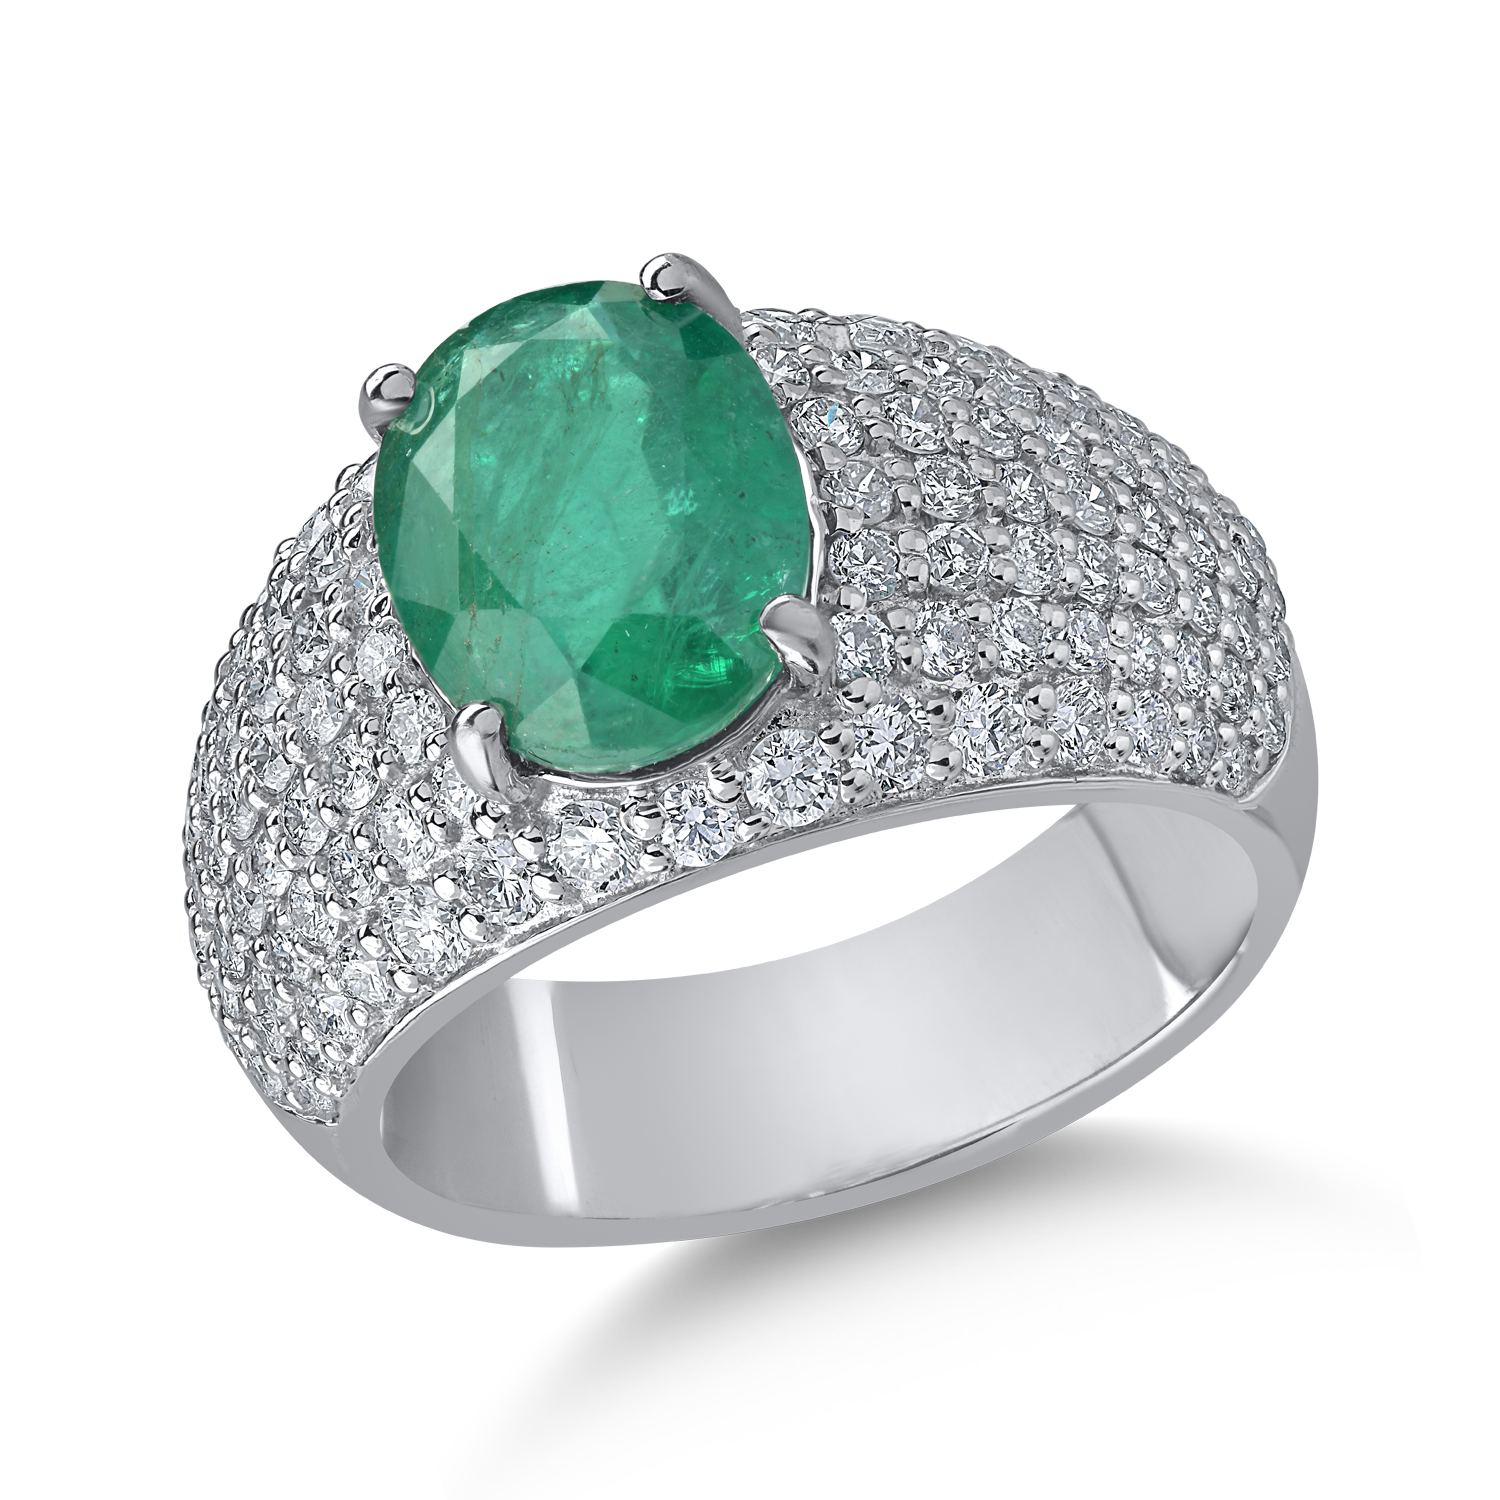 White gold ring with 2.76ct emerald and 1.444ct diamonds